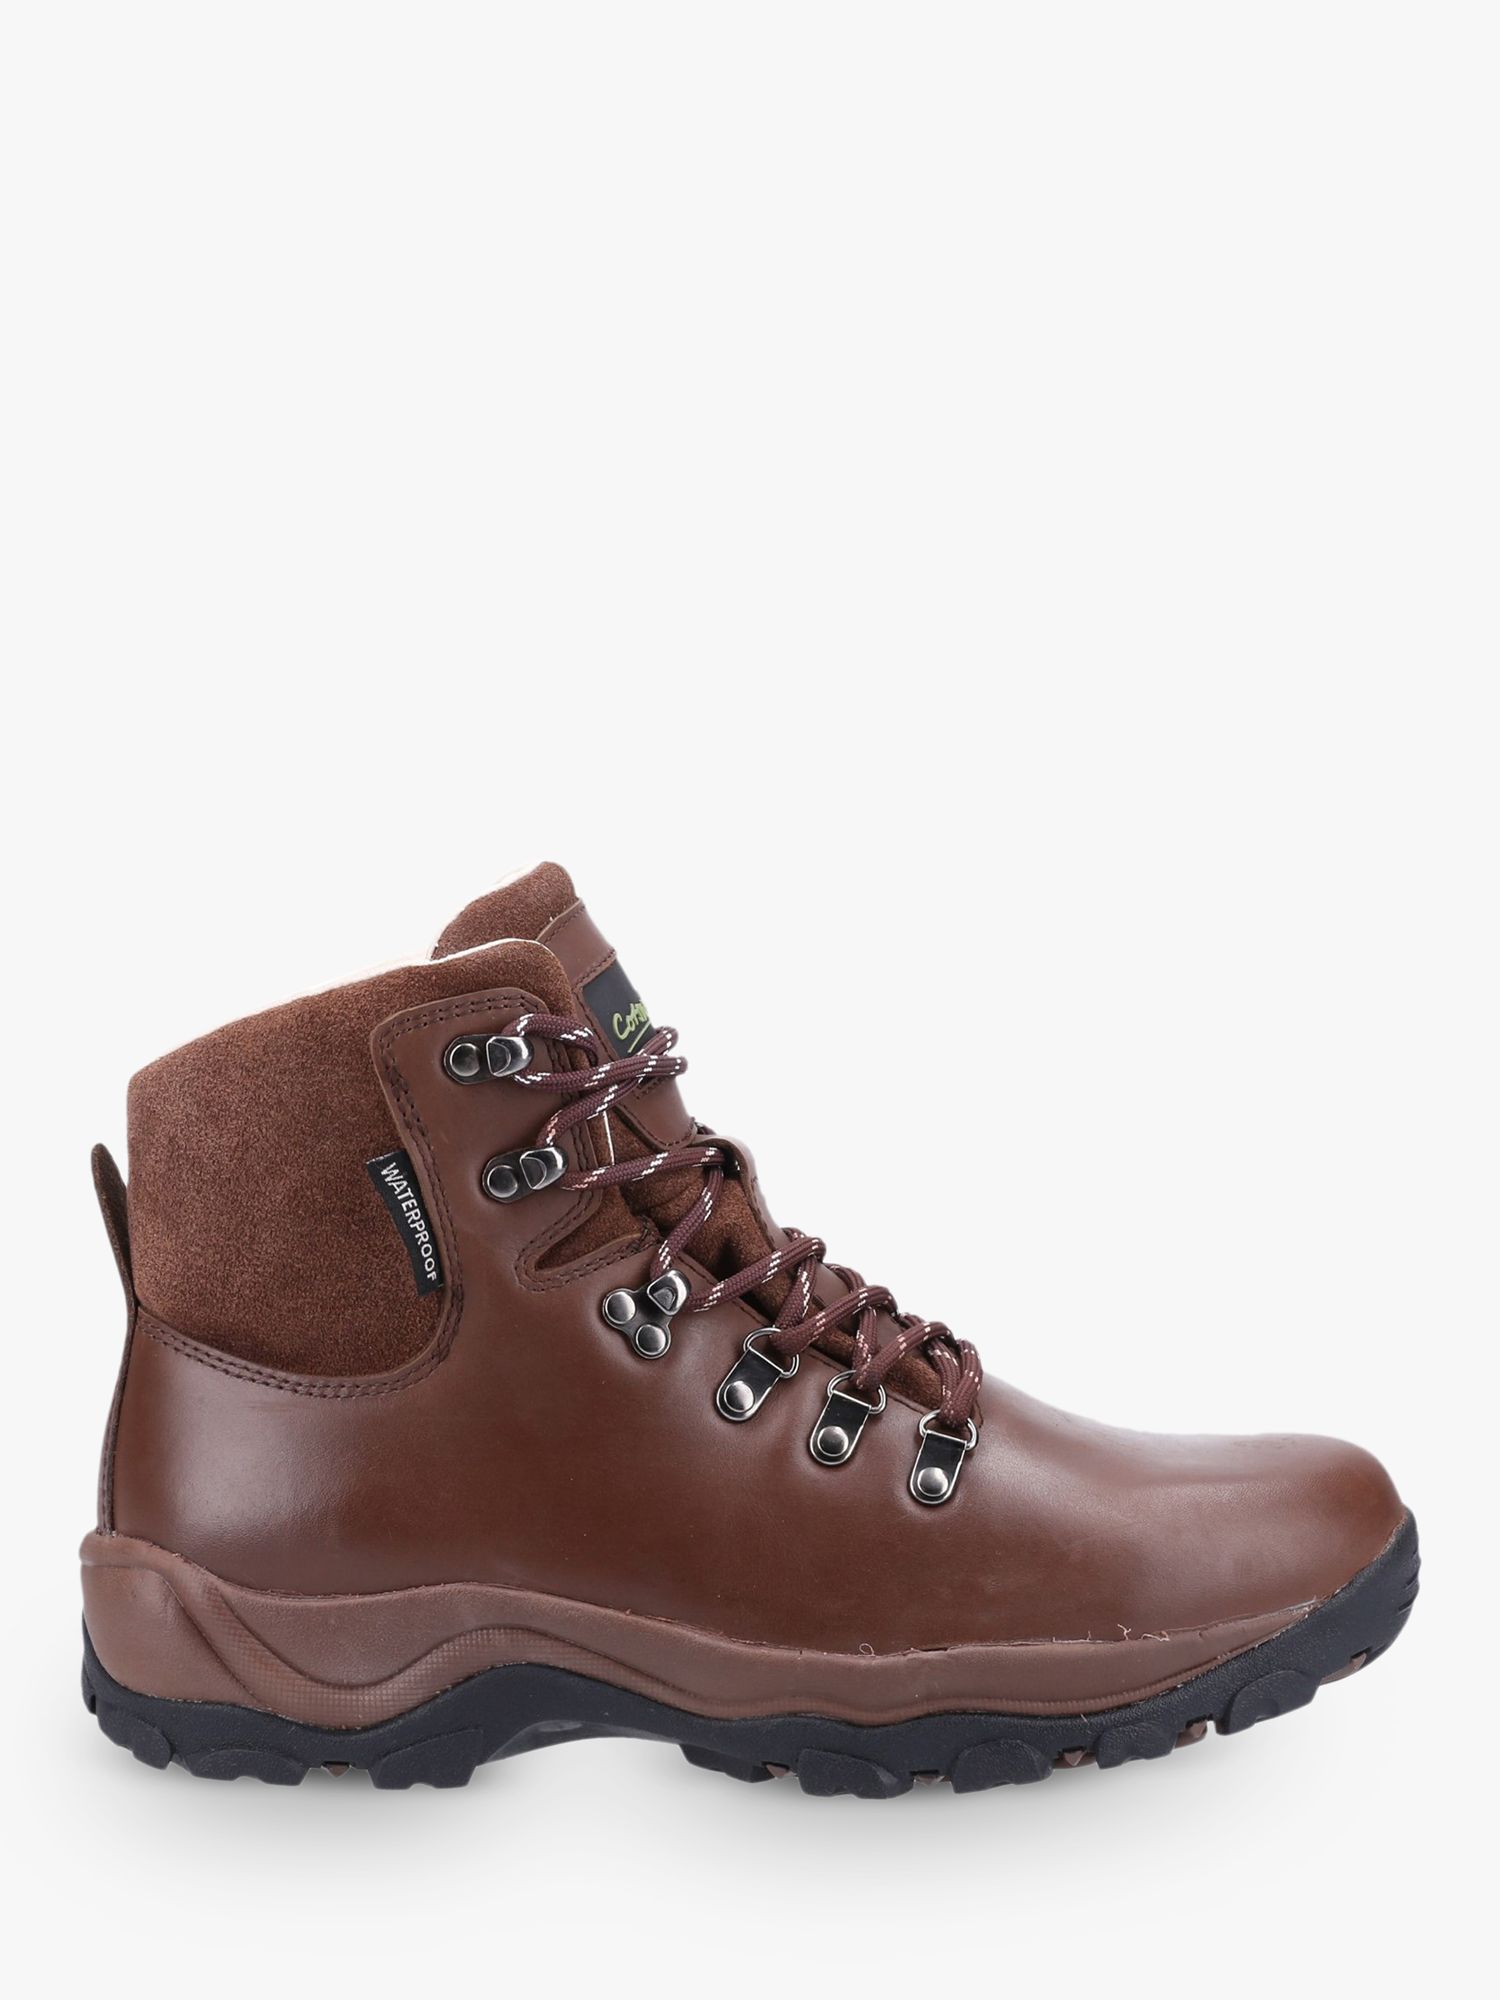 Cotswold Barnwood Hiking Boots, Brown at John Lewis & Partners